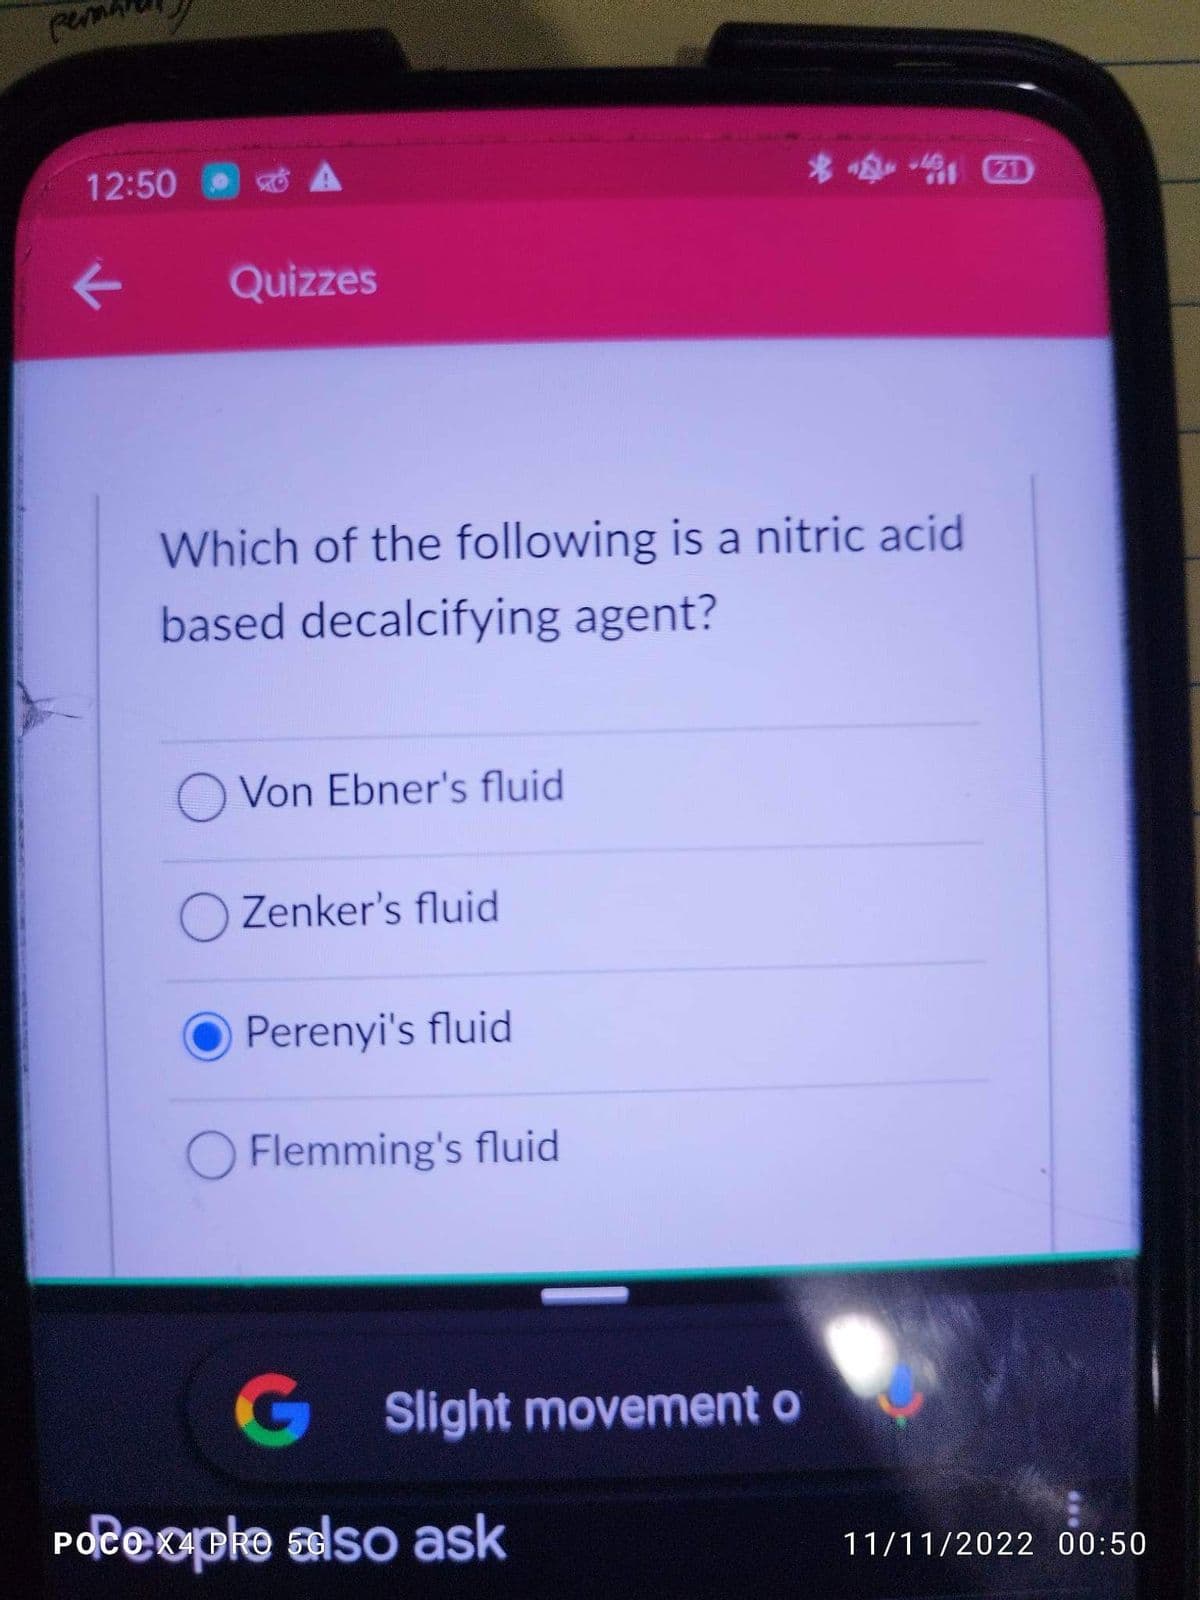 perna
12:50 -
Quizzes
Which of the following is a nitric acid
based decalcifying agent?
O Von Ebner's fluid
Zenker's fluid
Perenyi's fluid
Flemming's fluid
G Slight movement o
Poceople also ask
11/11/2022 00:50